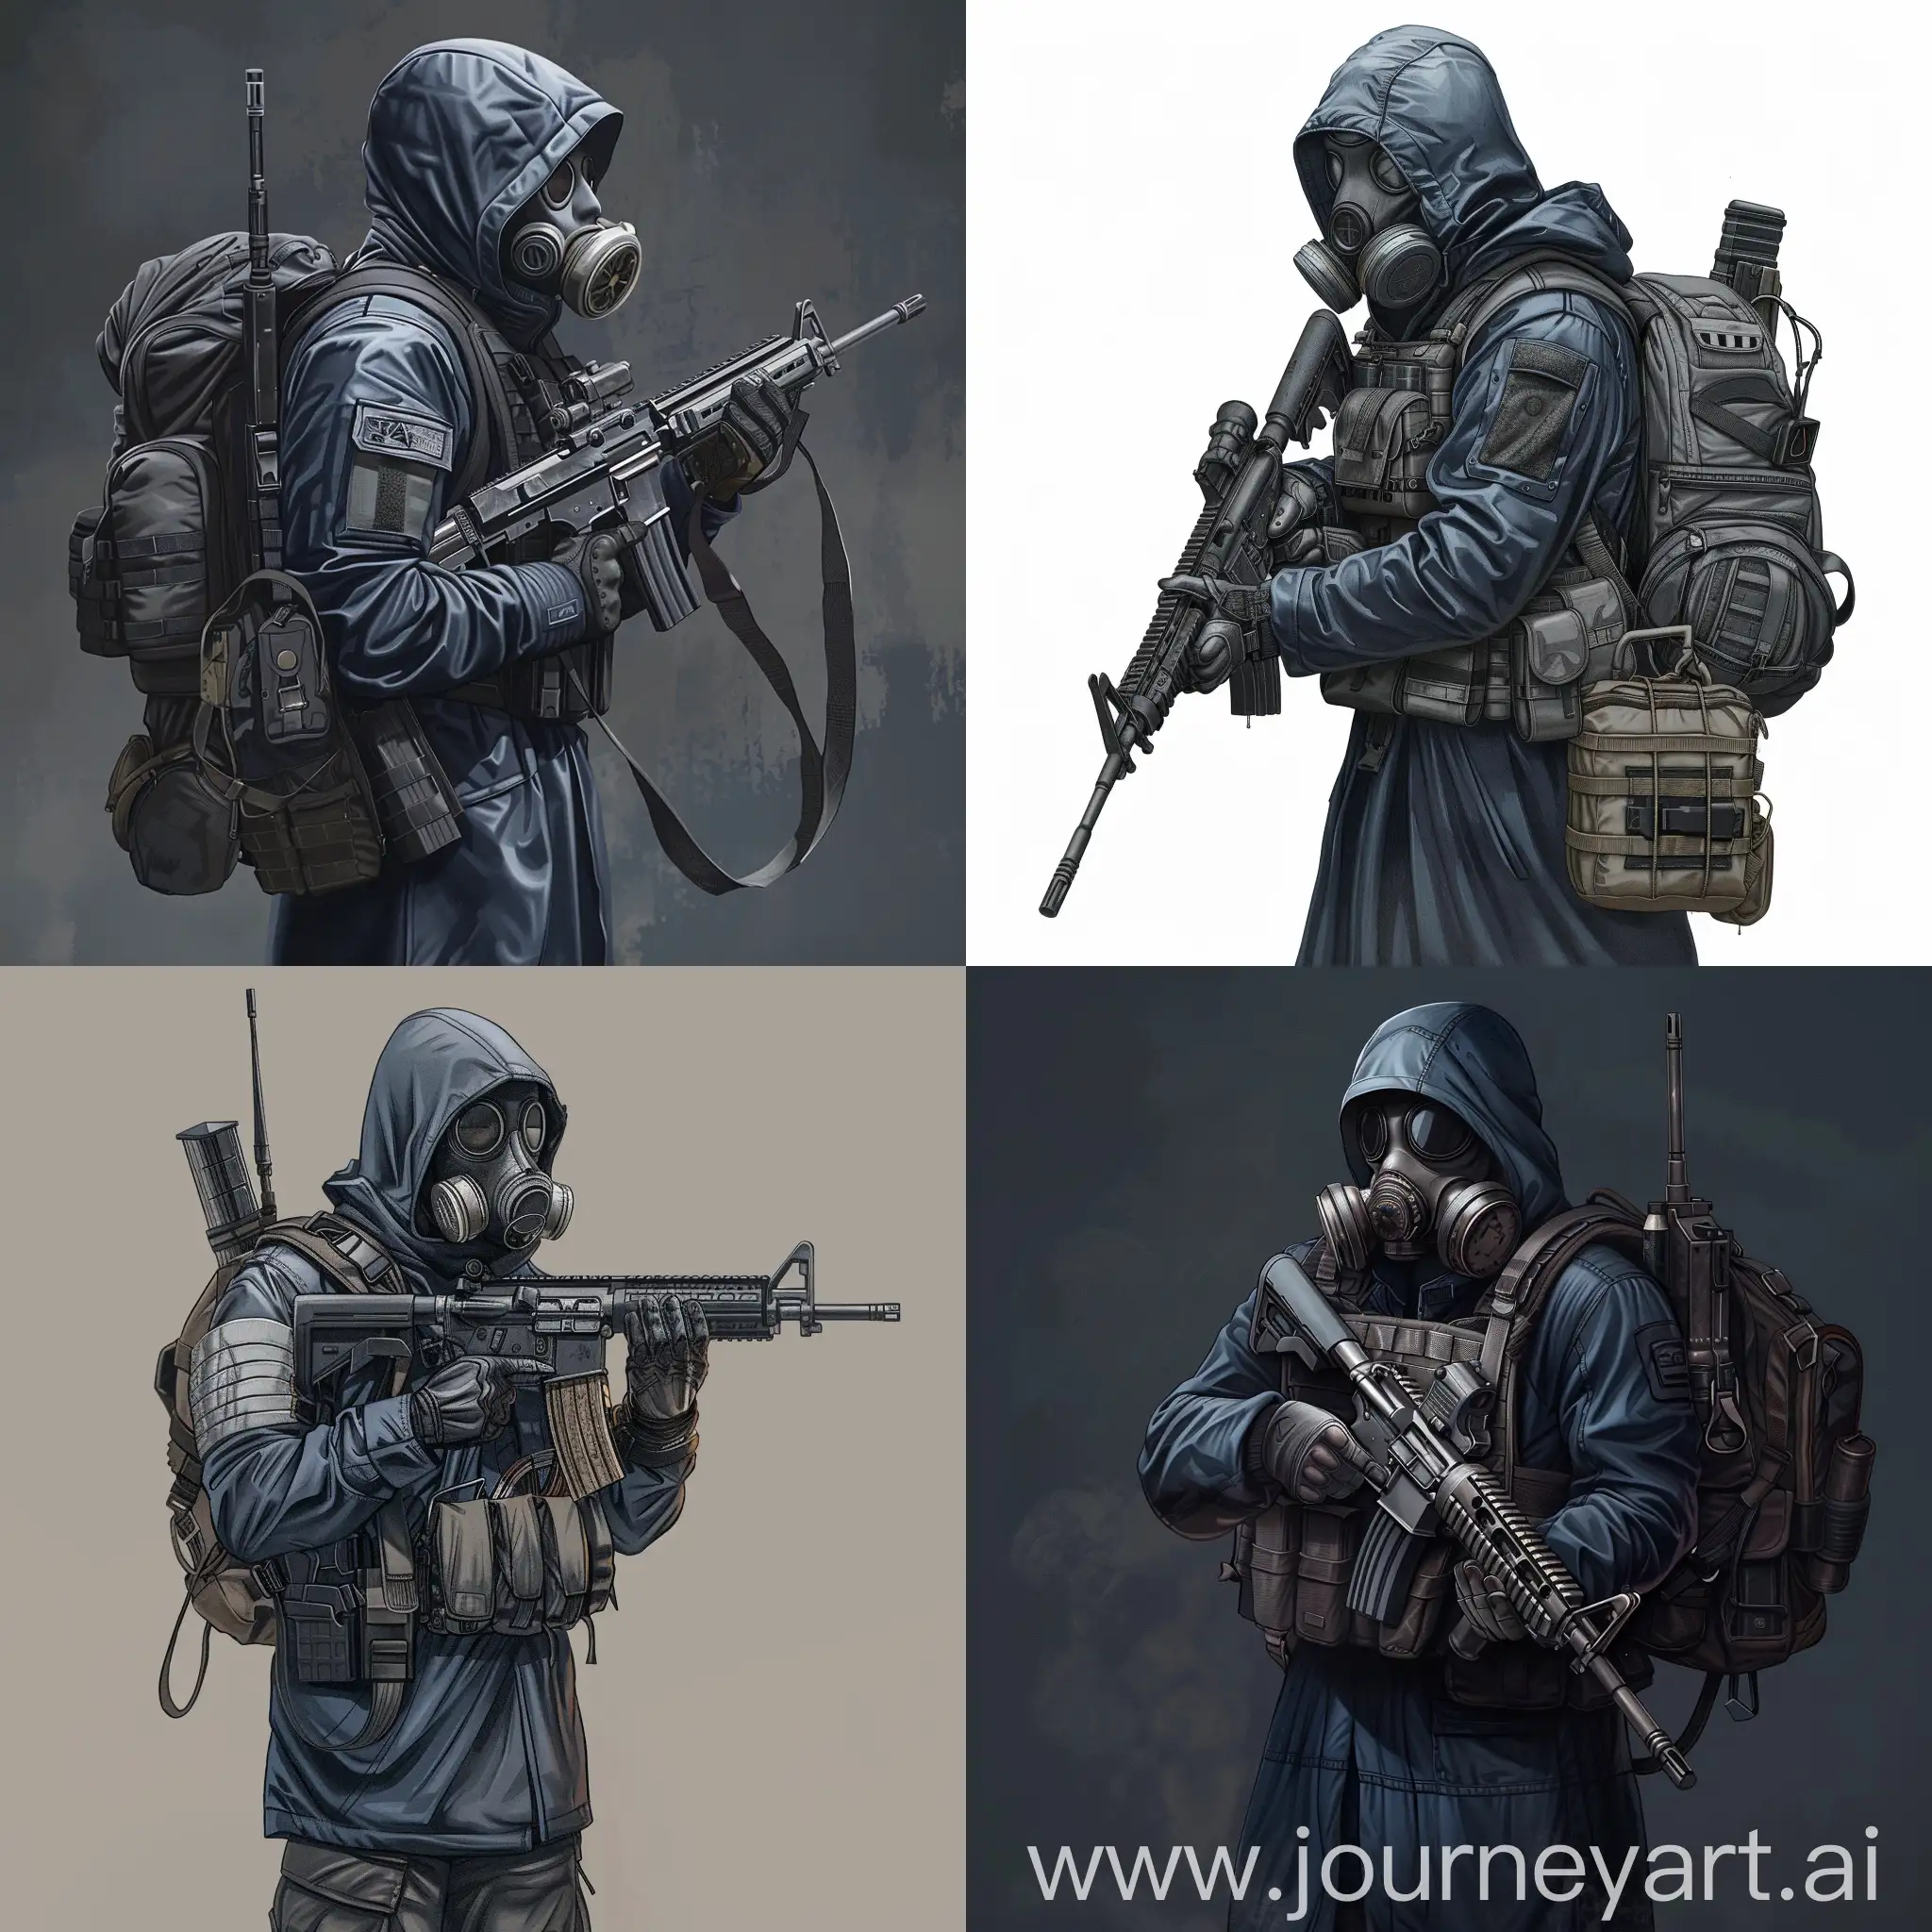 Digital character desing, mercenary from the universe of S.T.A.L.K.E.R., dressed in a dark blue military raincoat, gray military armor on his body, a gasmask on his face, a military backpack on his back, a rifle in his hands.